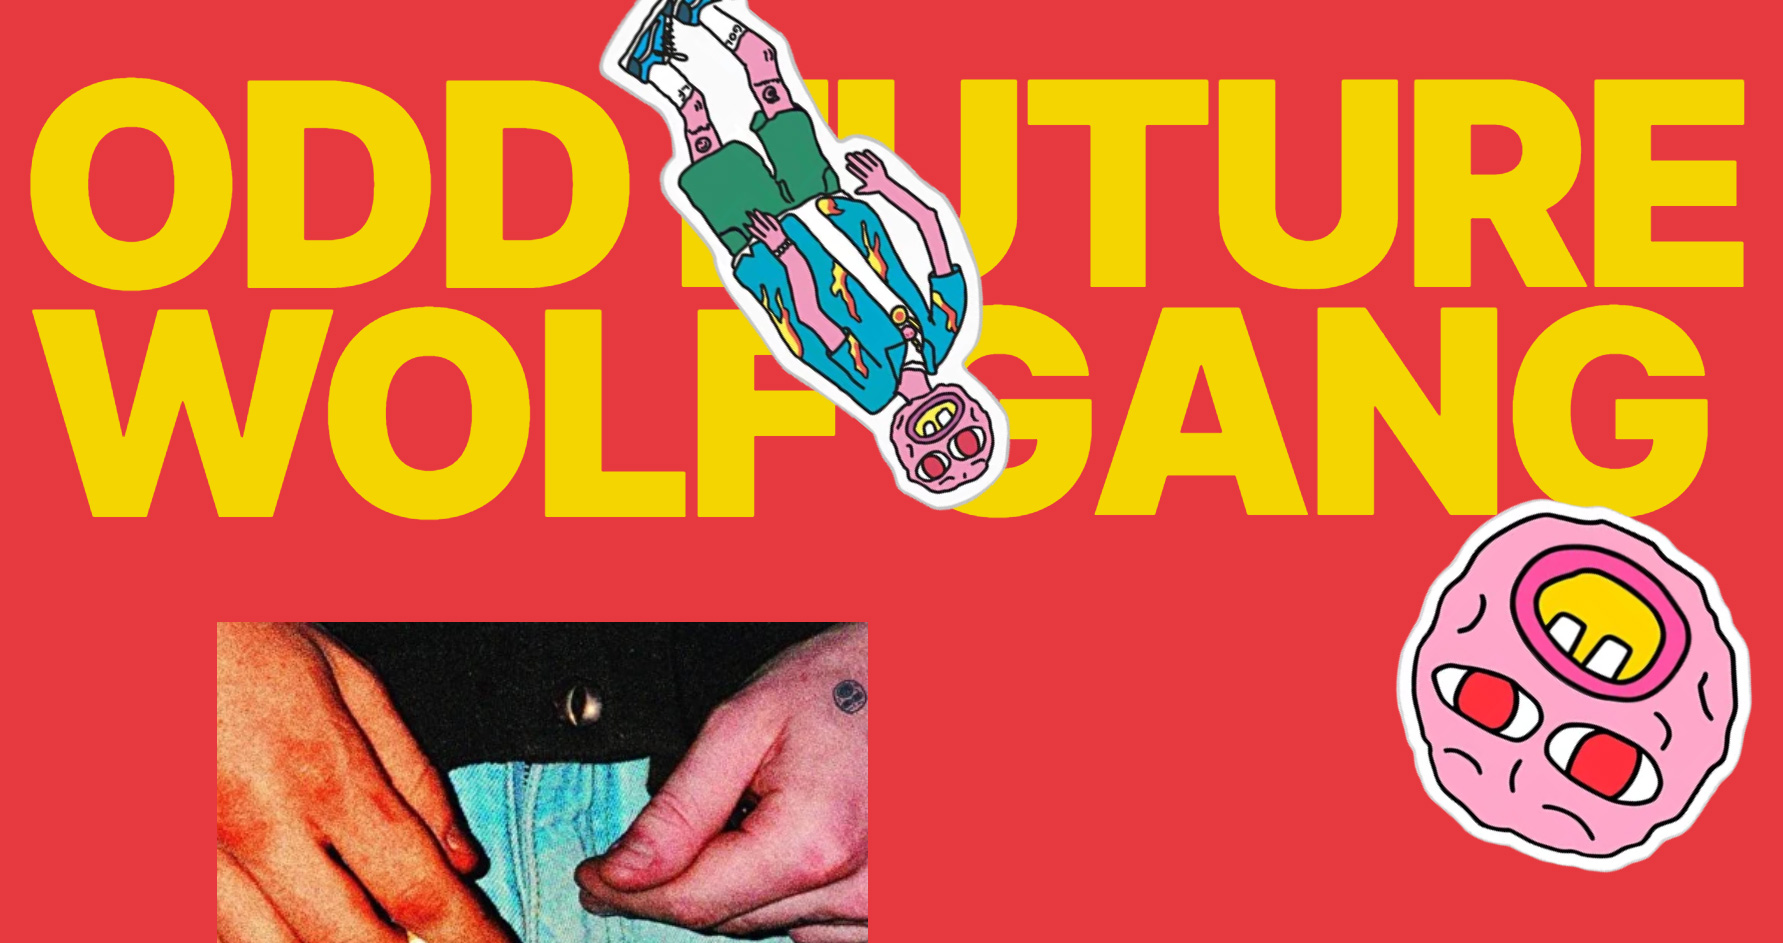 Tyler the creator - Website of the Day